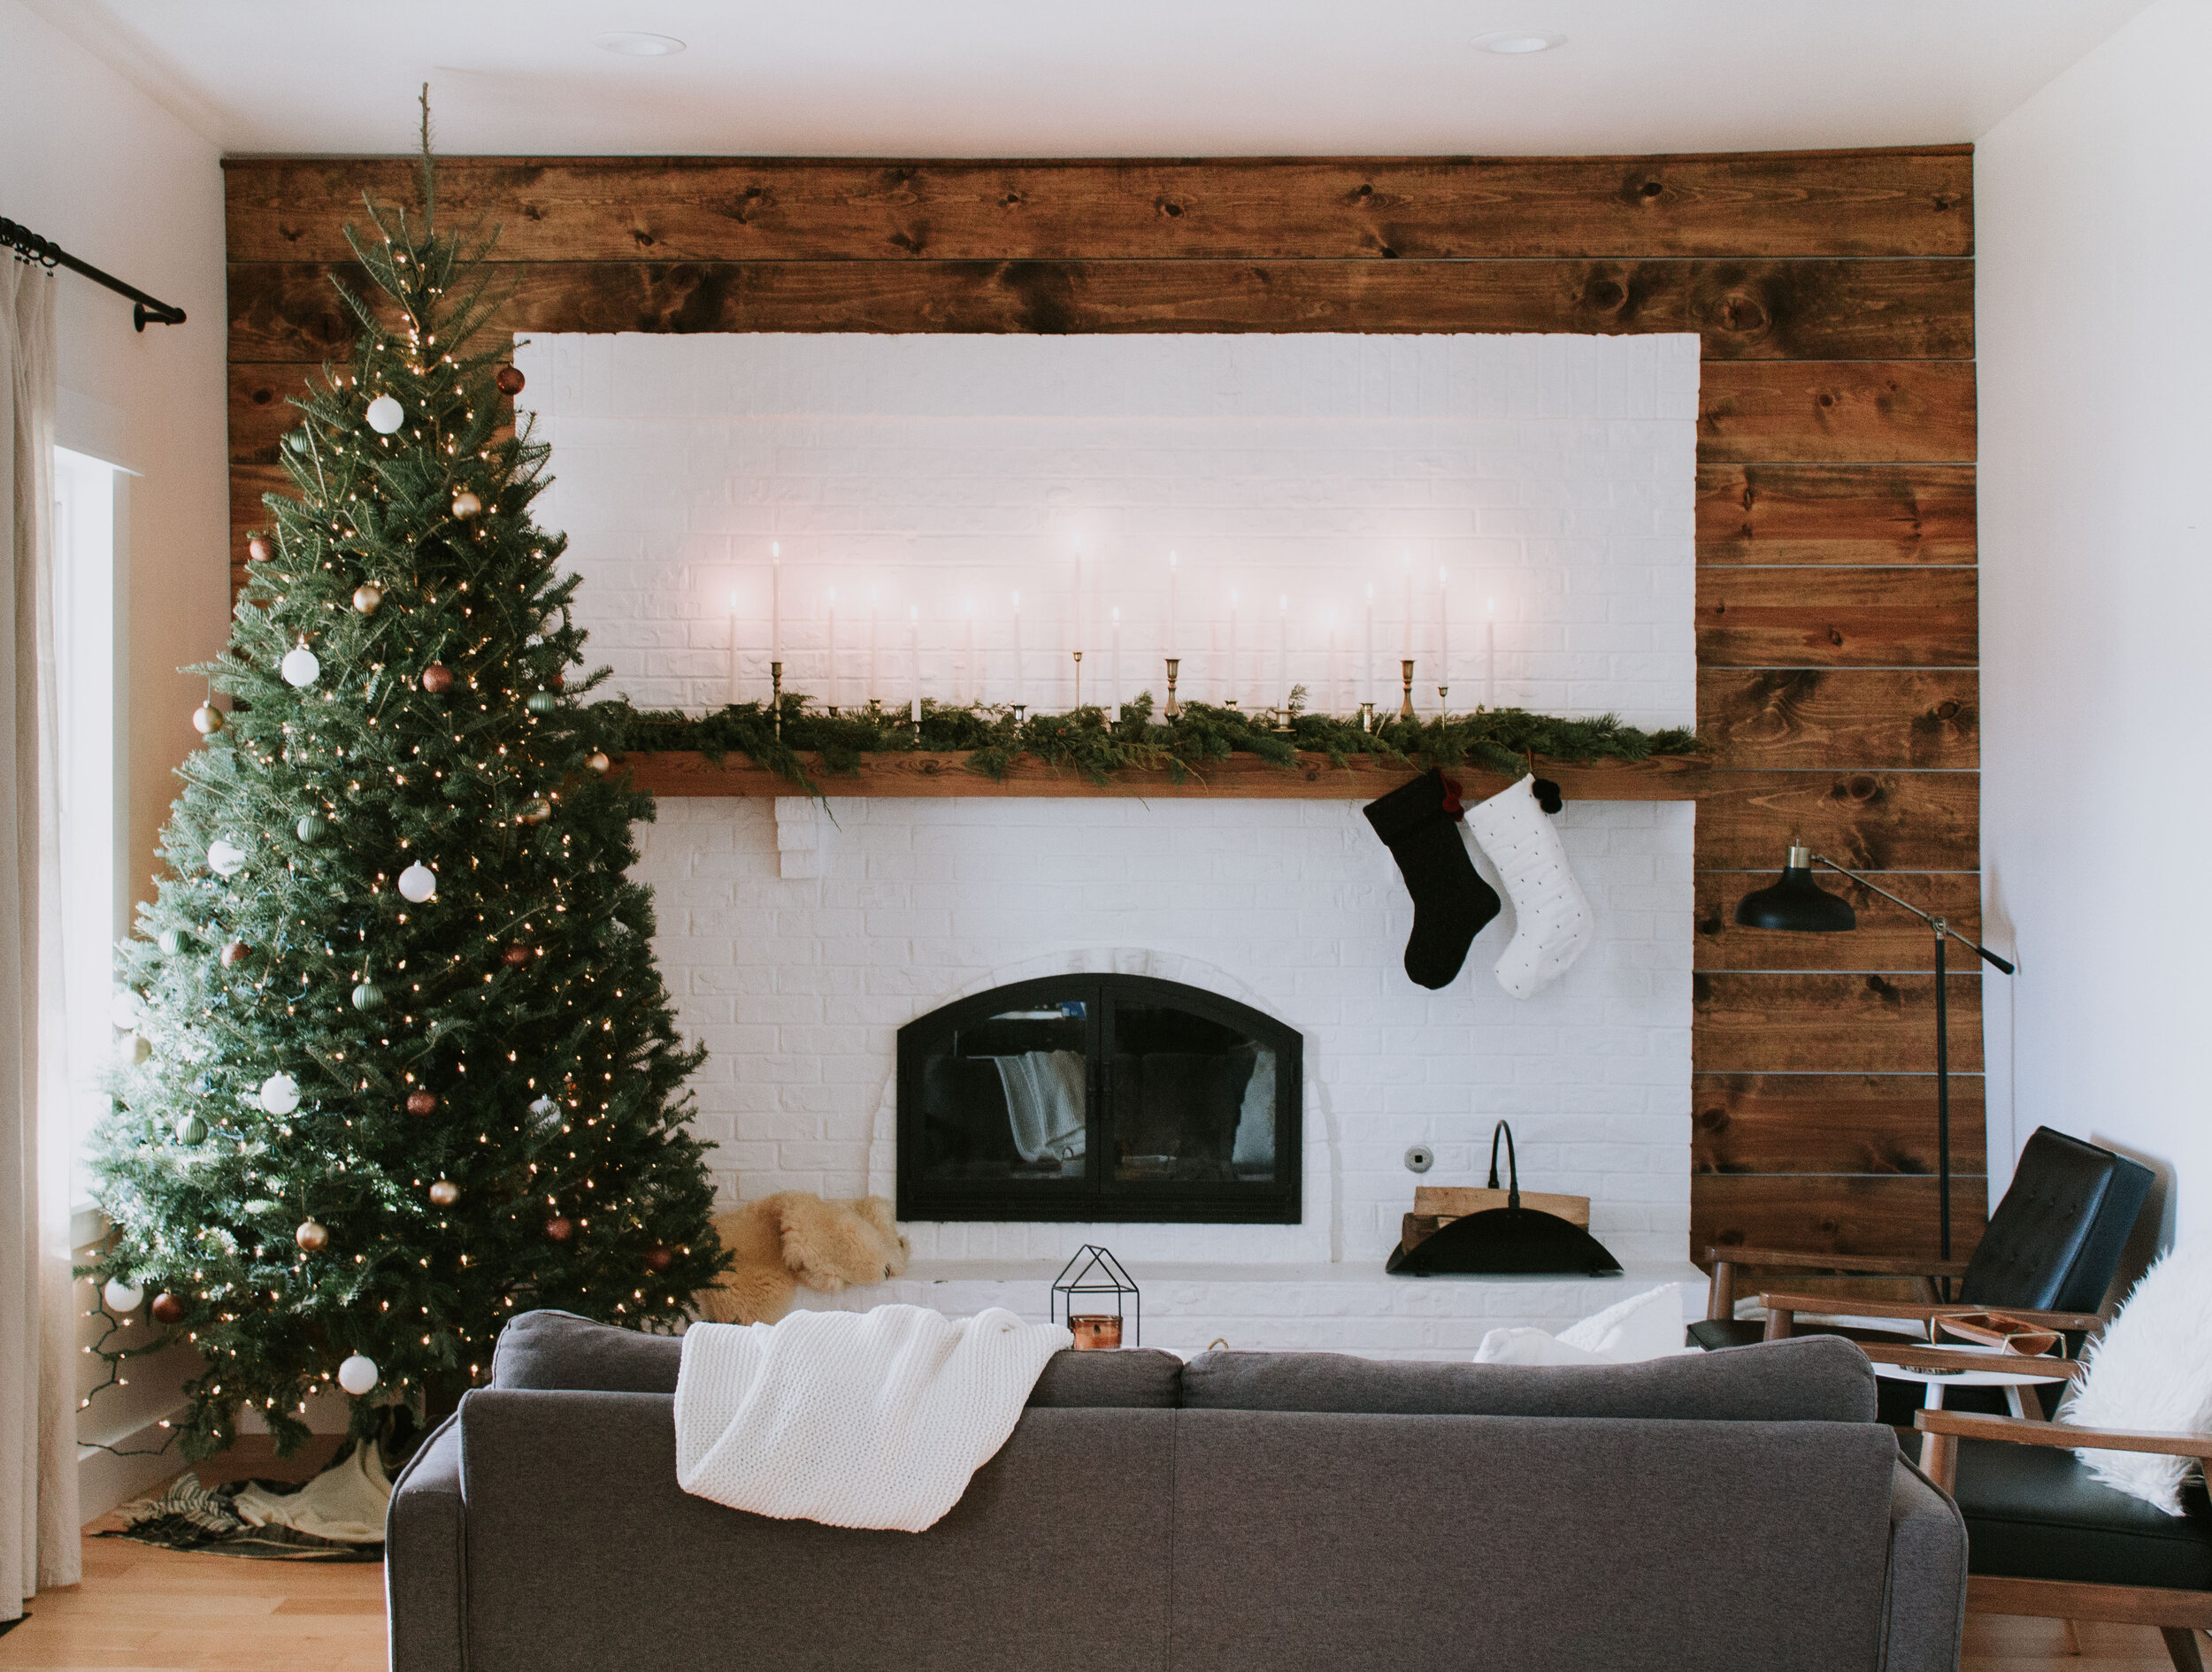 Our Thrifted Christmas Home Tour | Nadine Stay - Thrifted holiday decor inspiration. Modern holiday living room and kitchen makeover